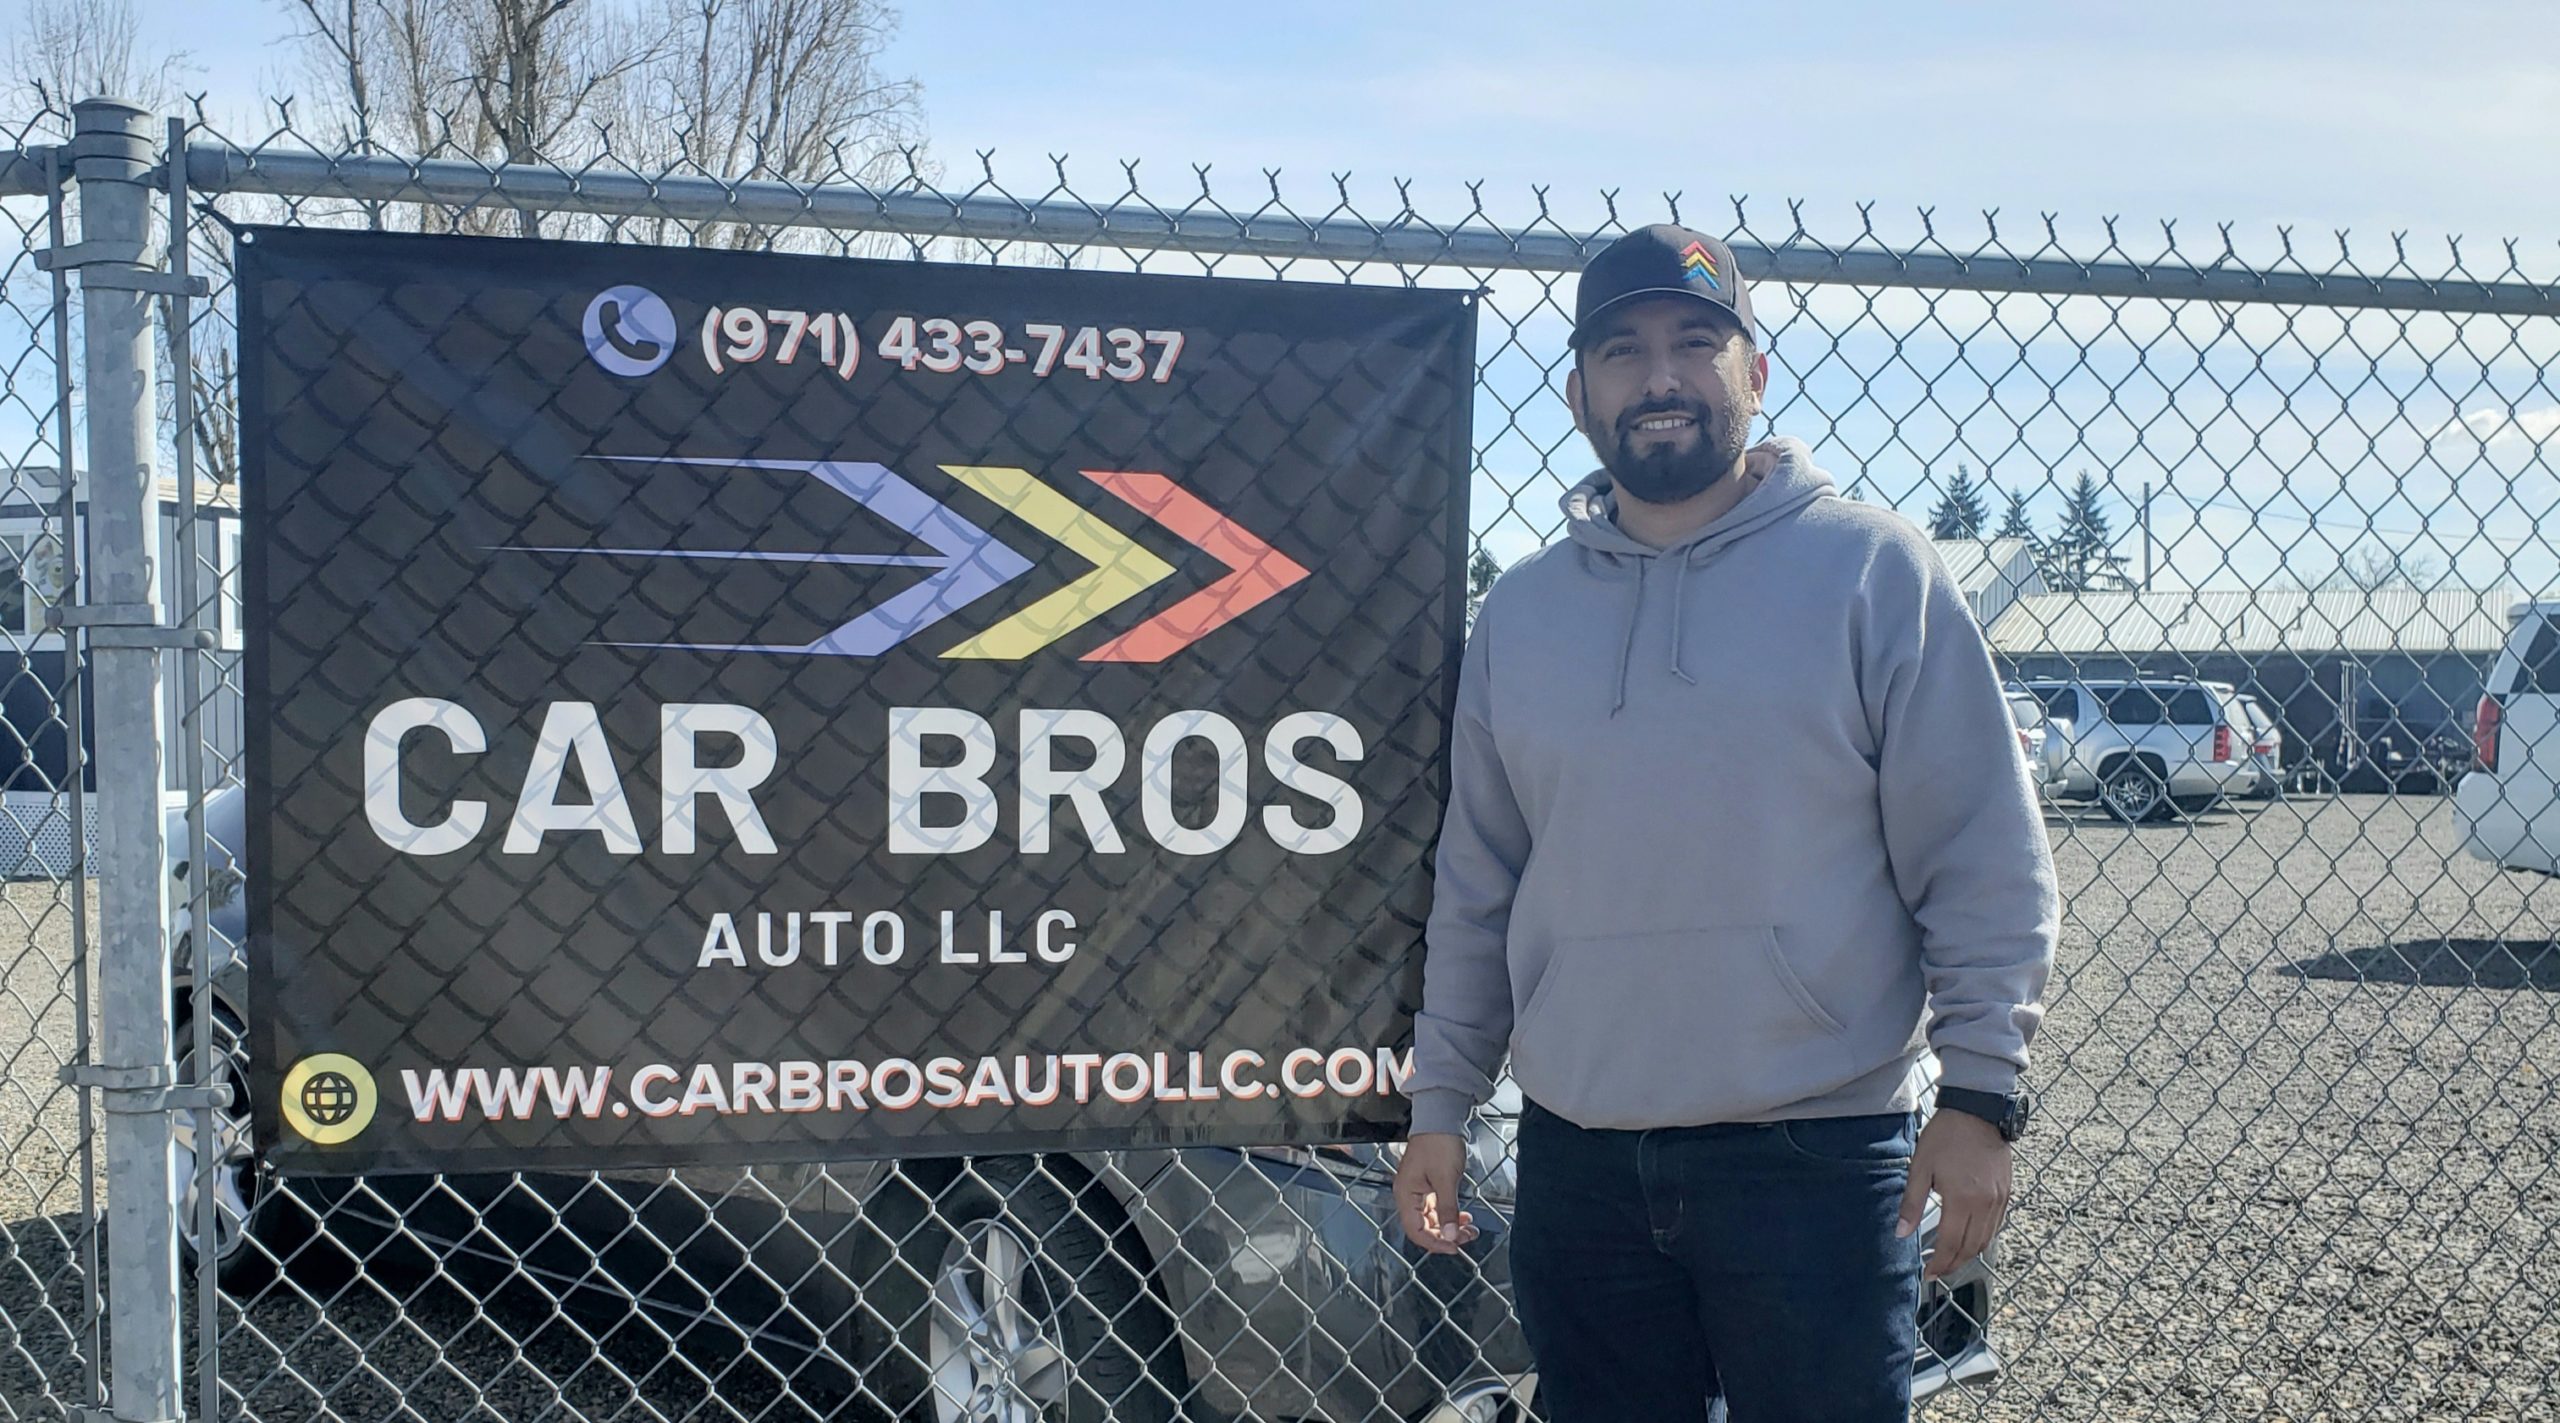 Car Bros Auto, LLC: Driving Community Impact with Quality and Affordability